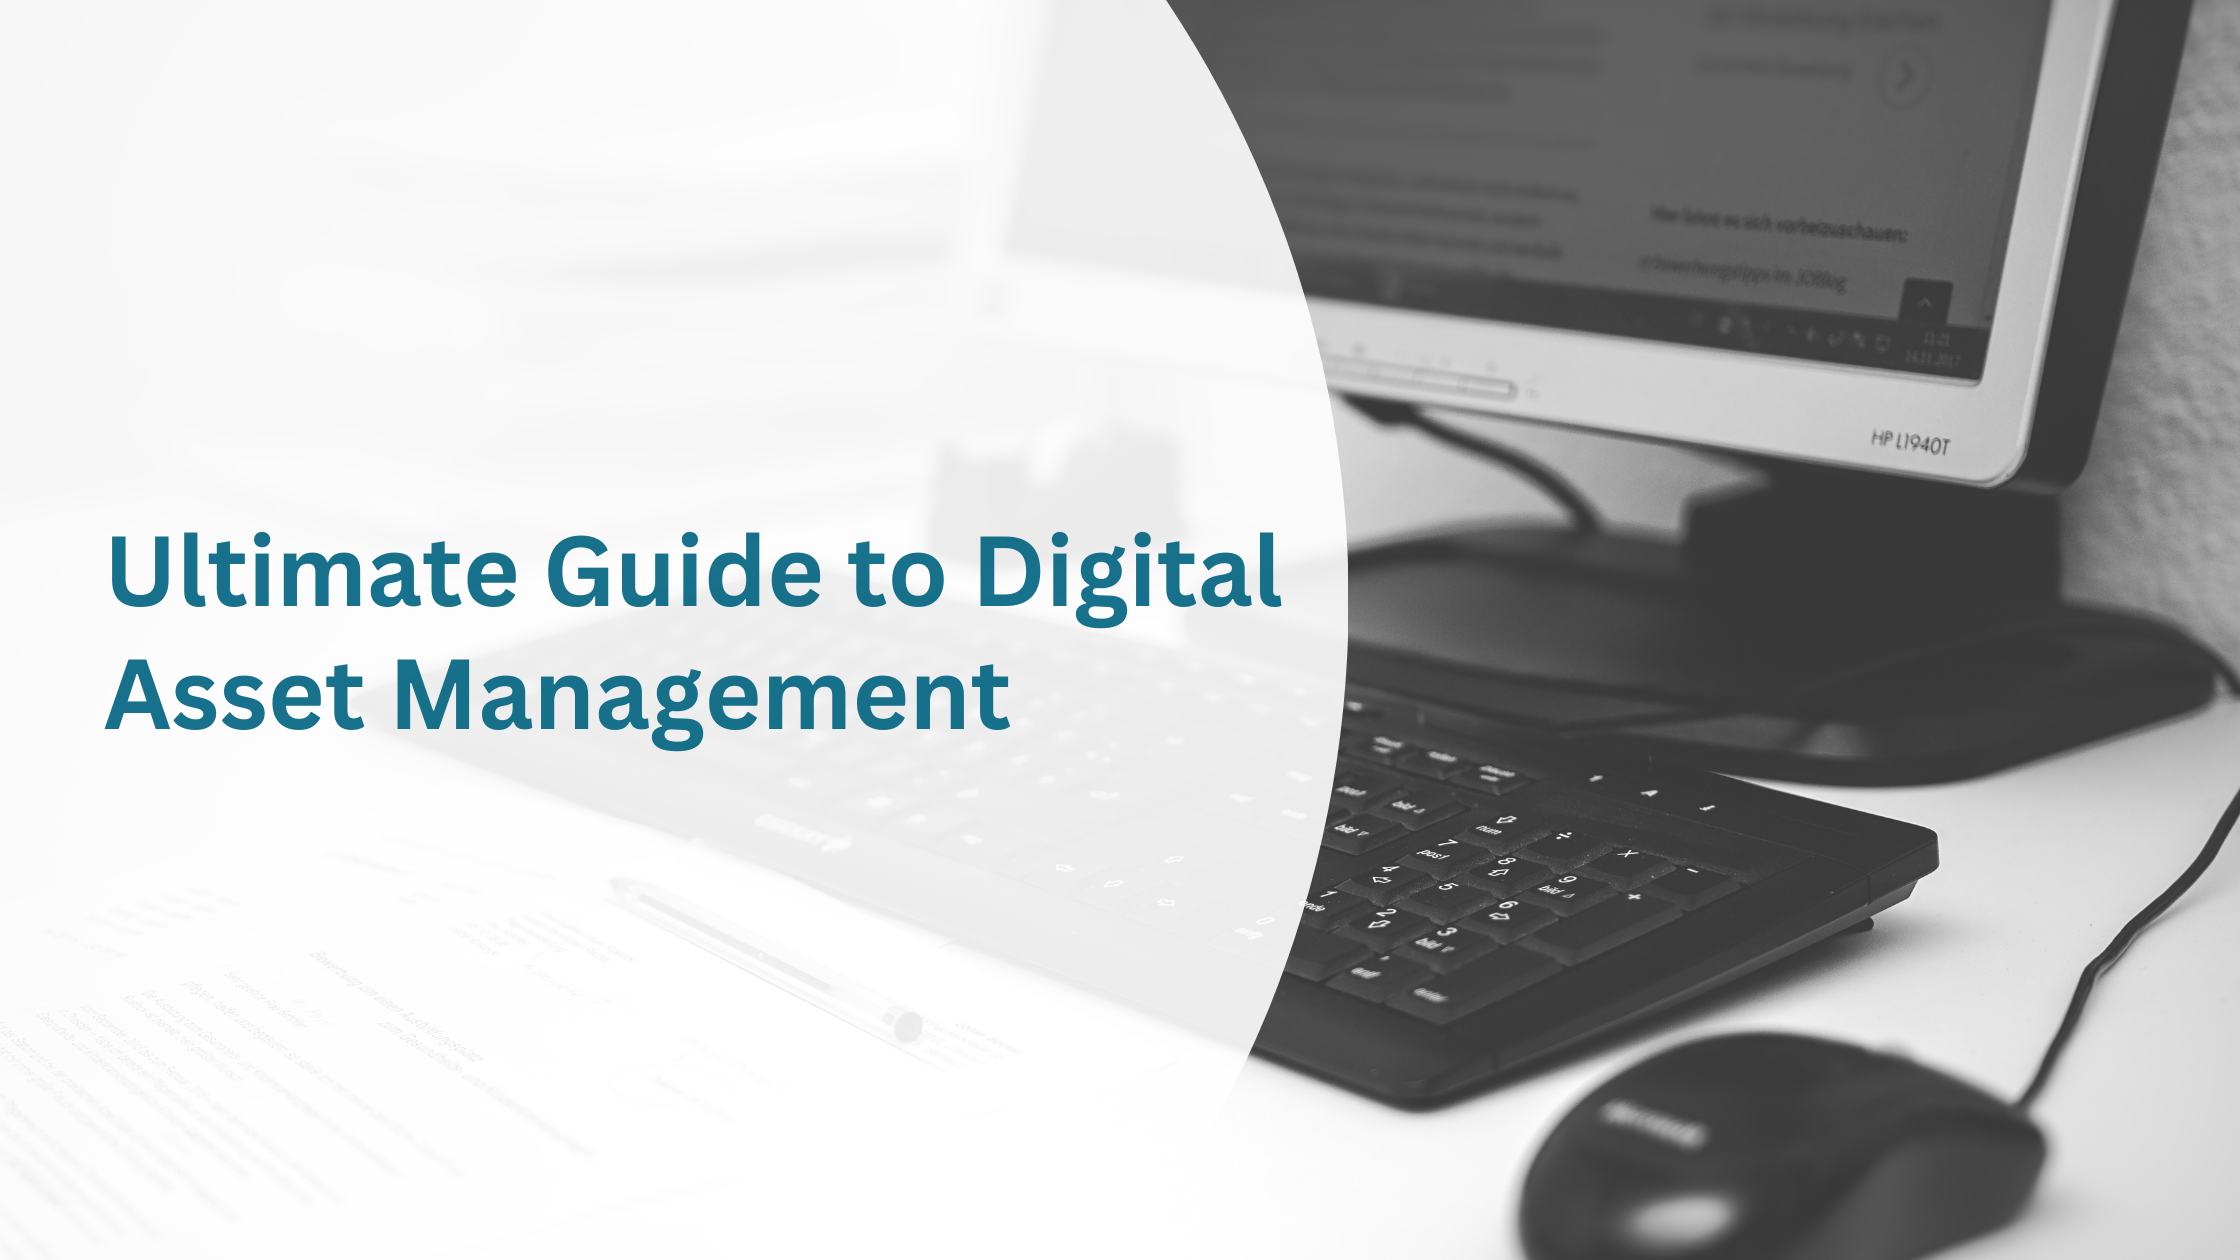 The Ultimate Guide to Digital Asset Management